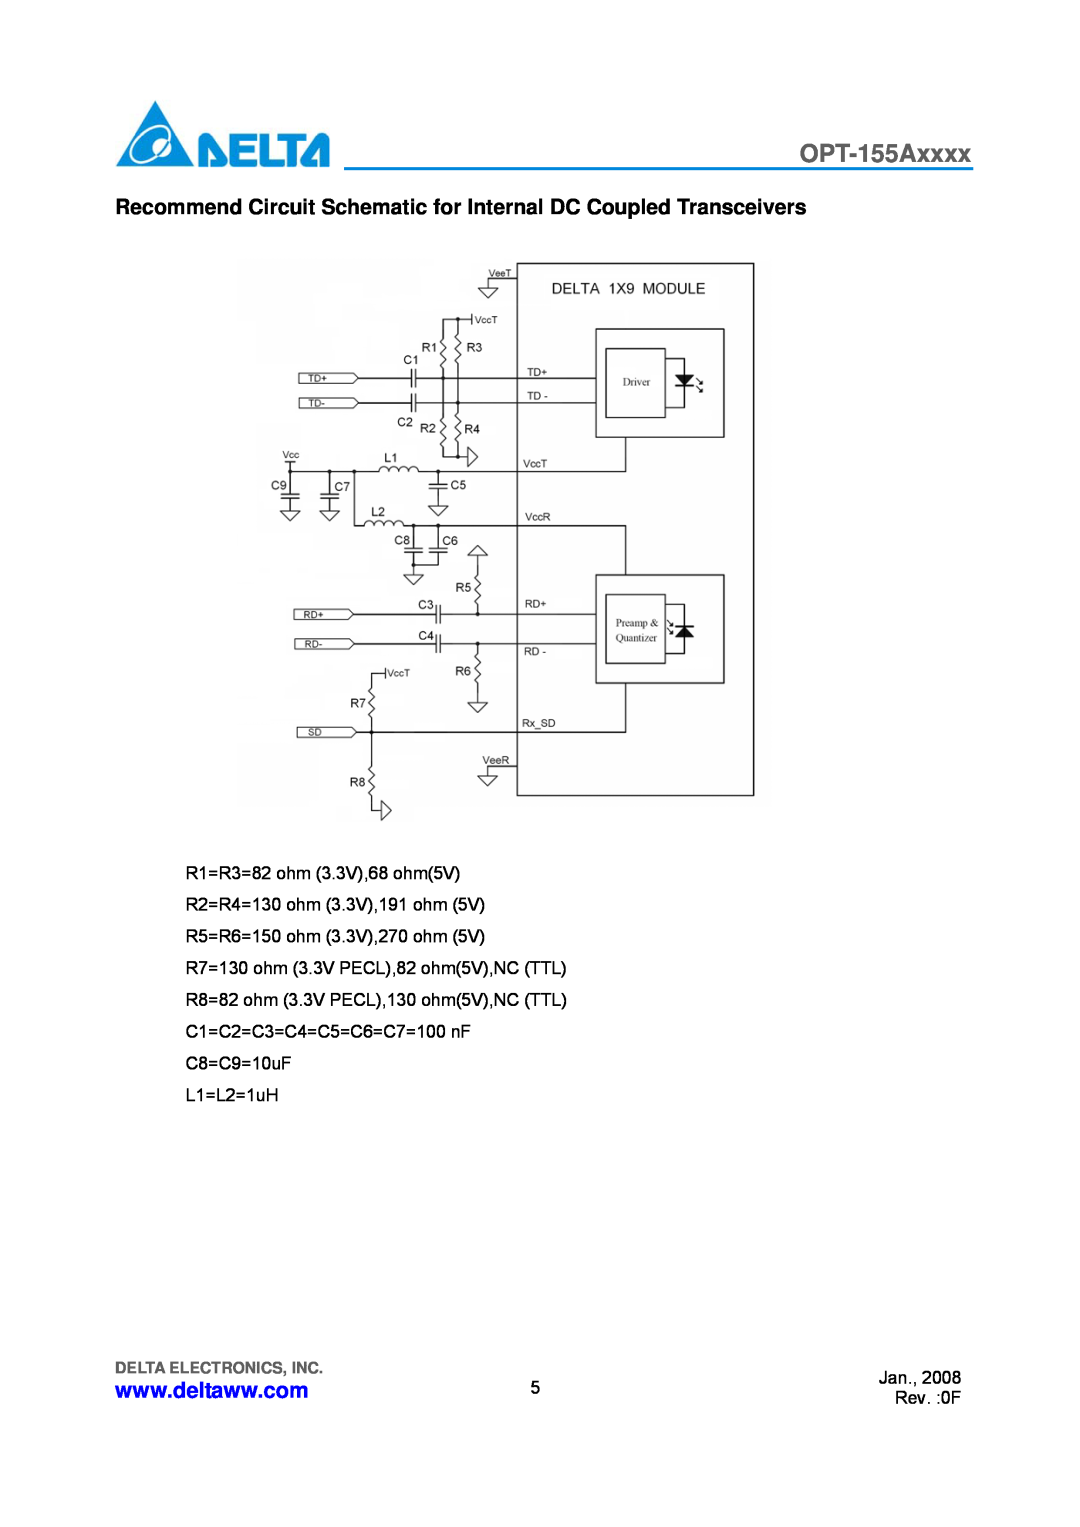 Delta Electronics OPT-155Axxxx Recommend Circuit Schematic for Internal DC Coupled Transceivers, Delta Electronics, Inc 